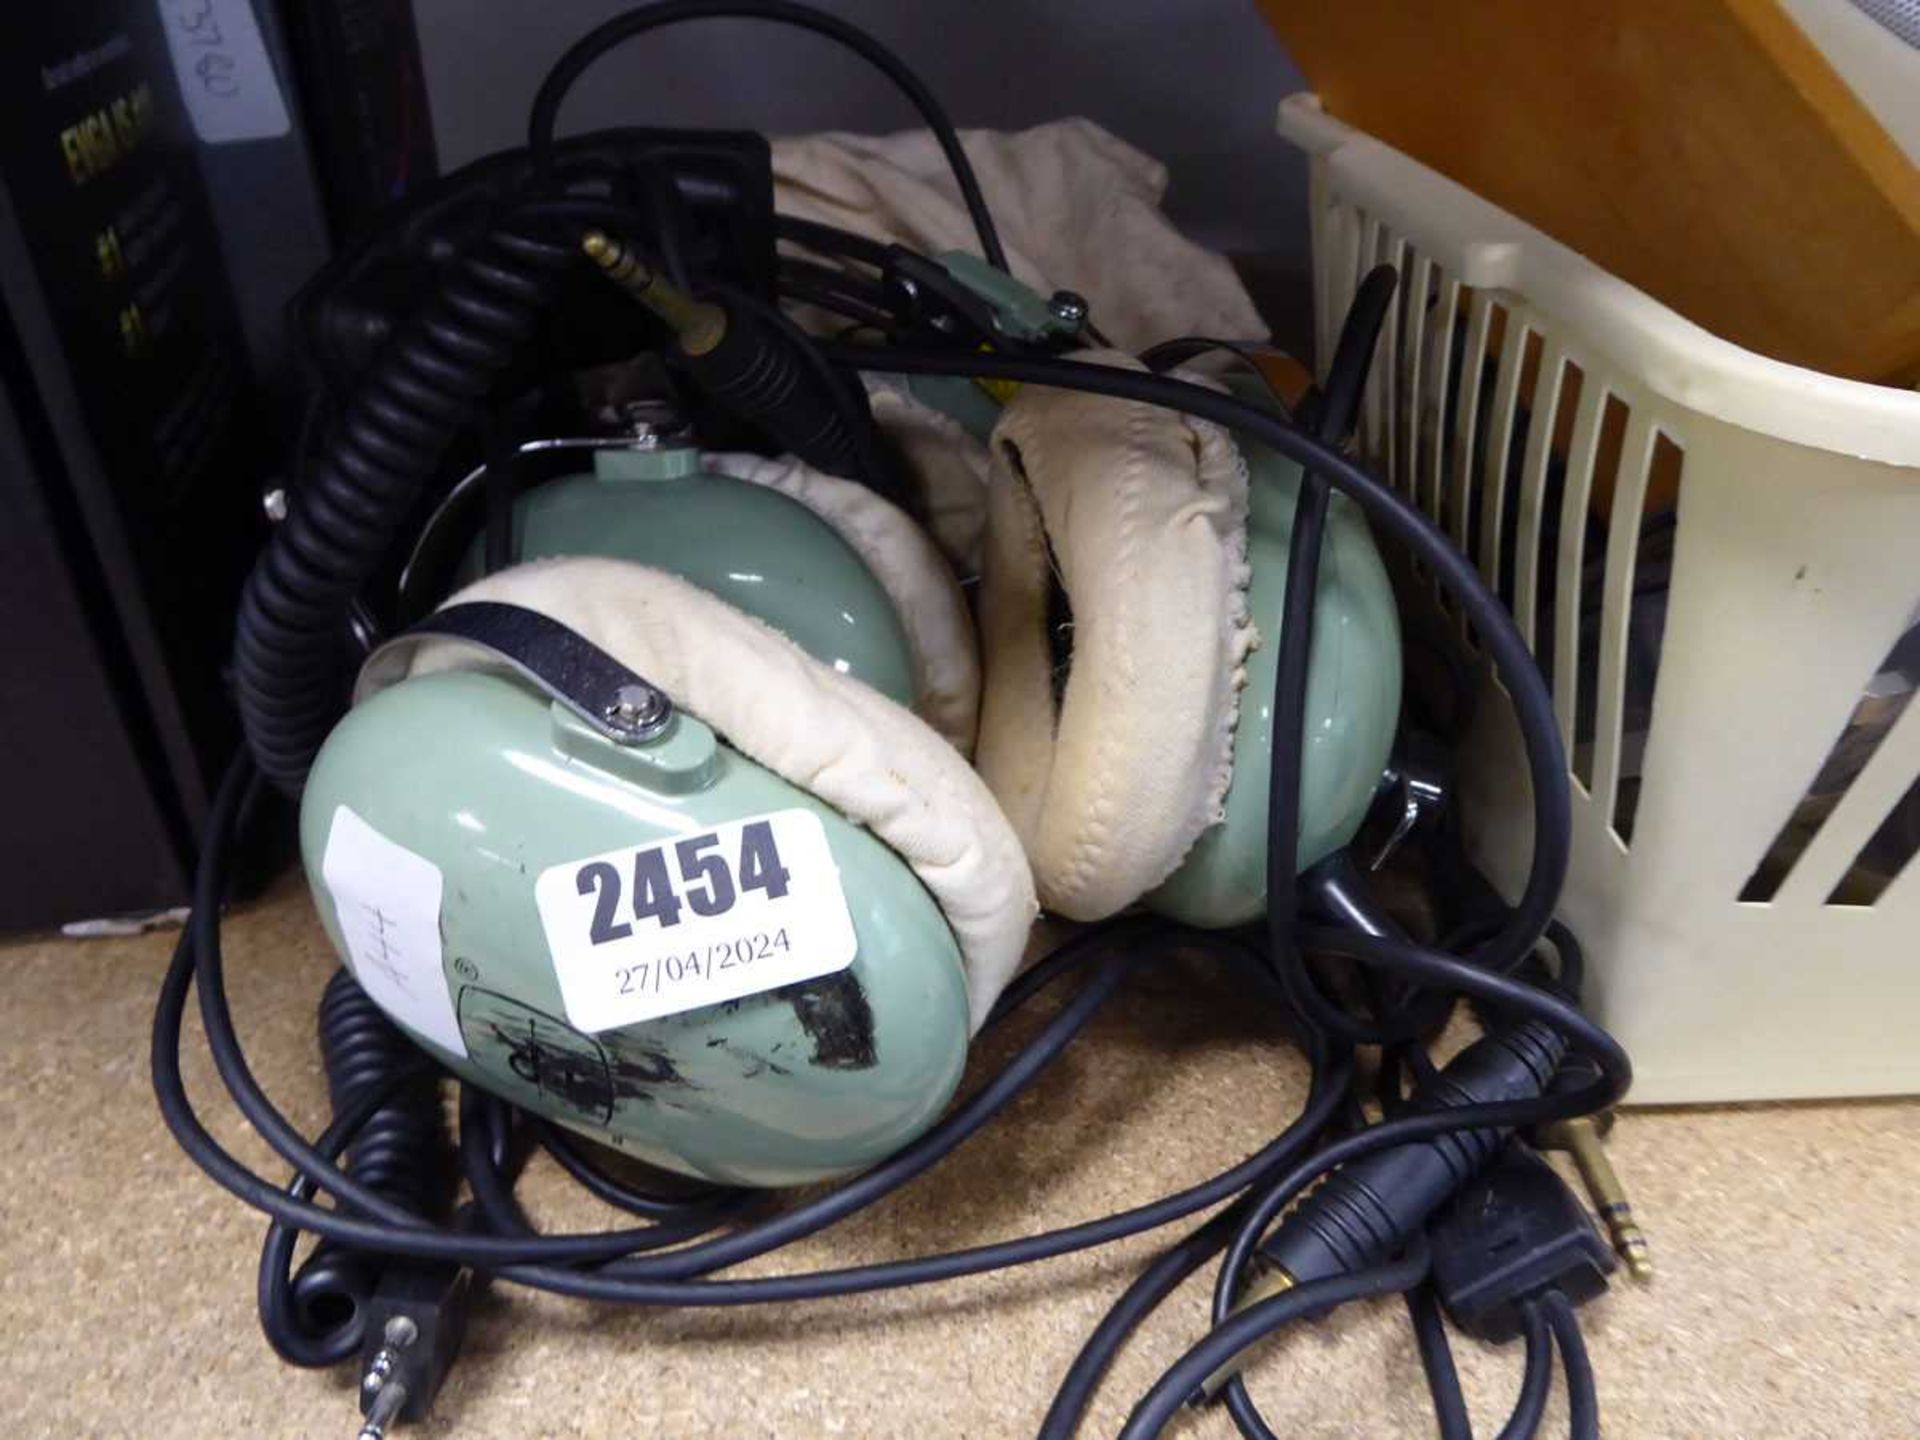 2 vintage headsets, possibly for aircraft